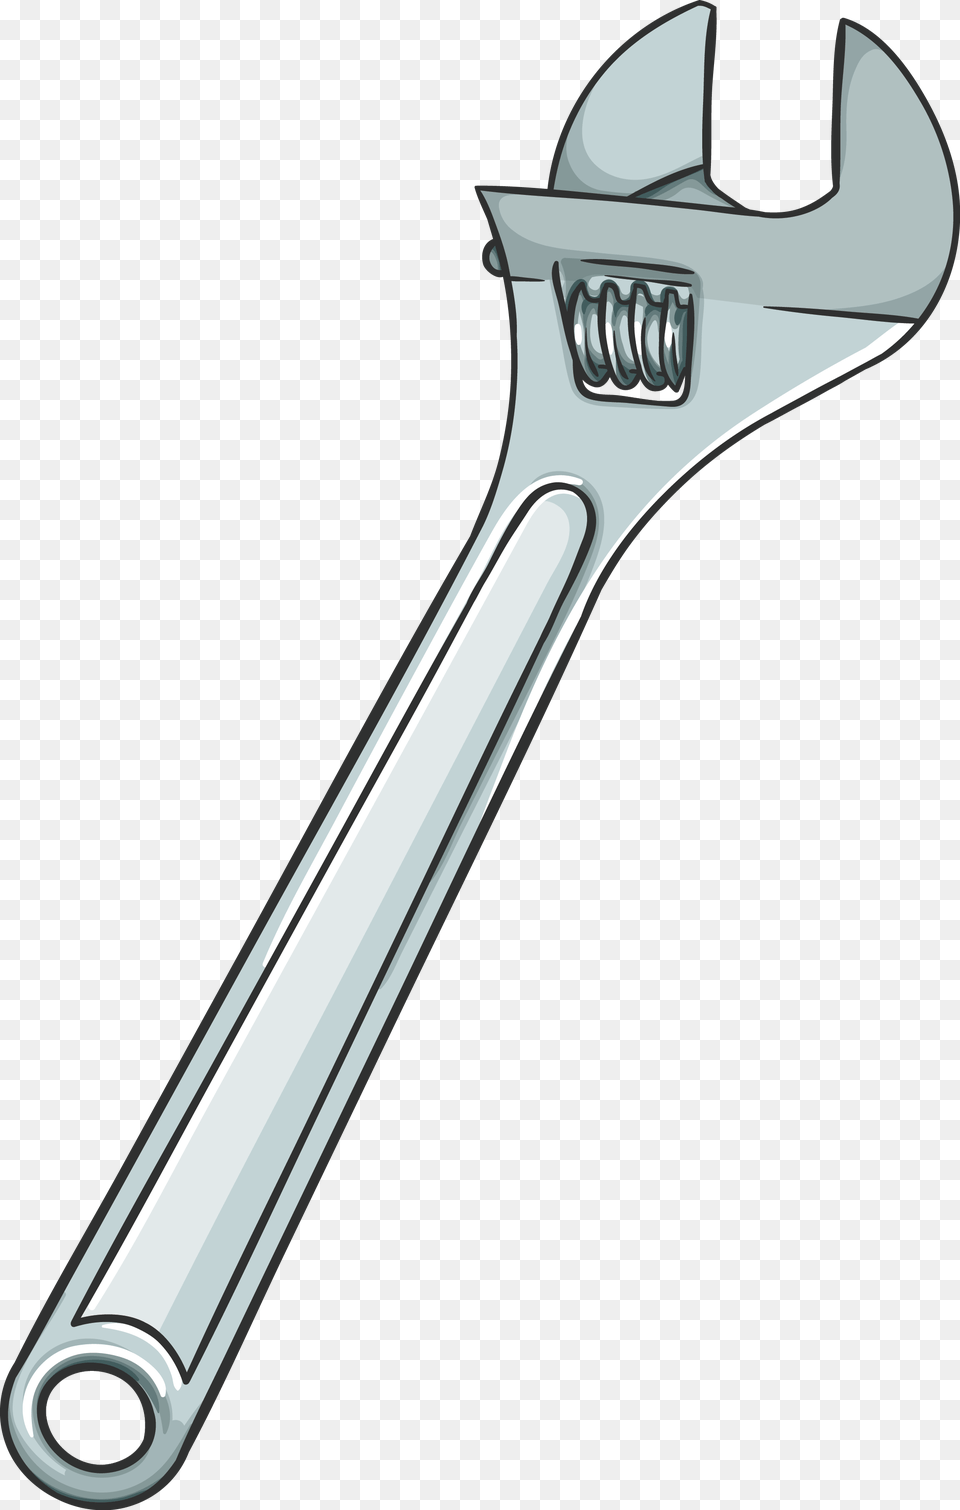 Adjustable Spanner With Background Adjustable Spanner, Wrench, Smoke Pipe Free Transparent Png